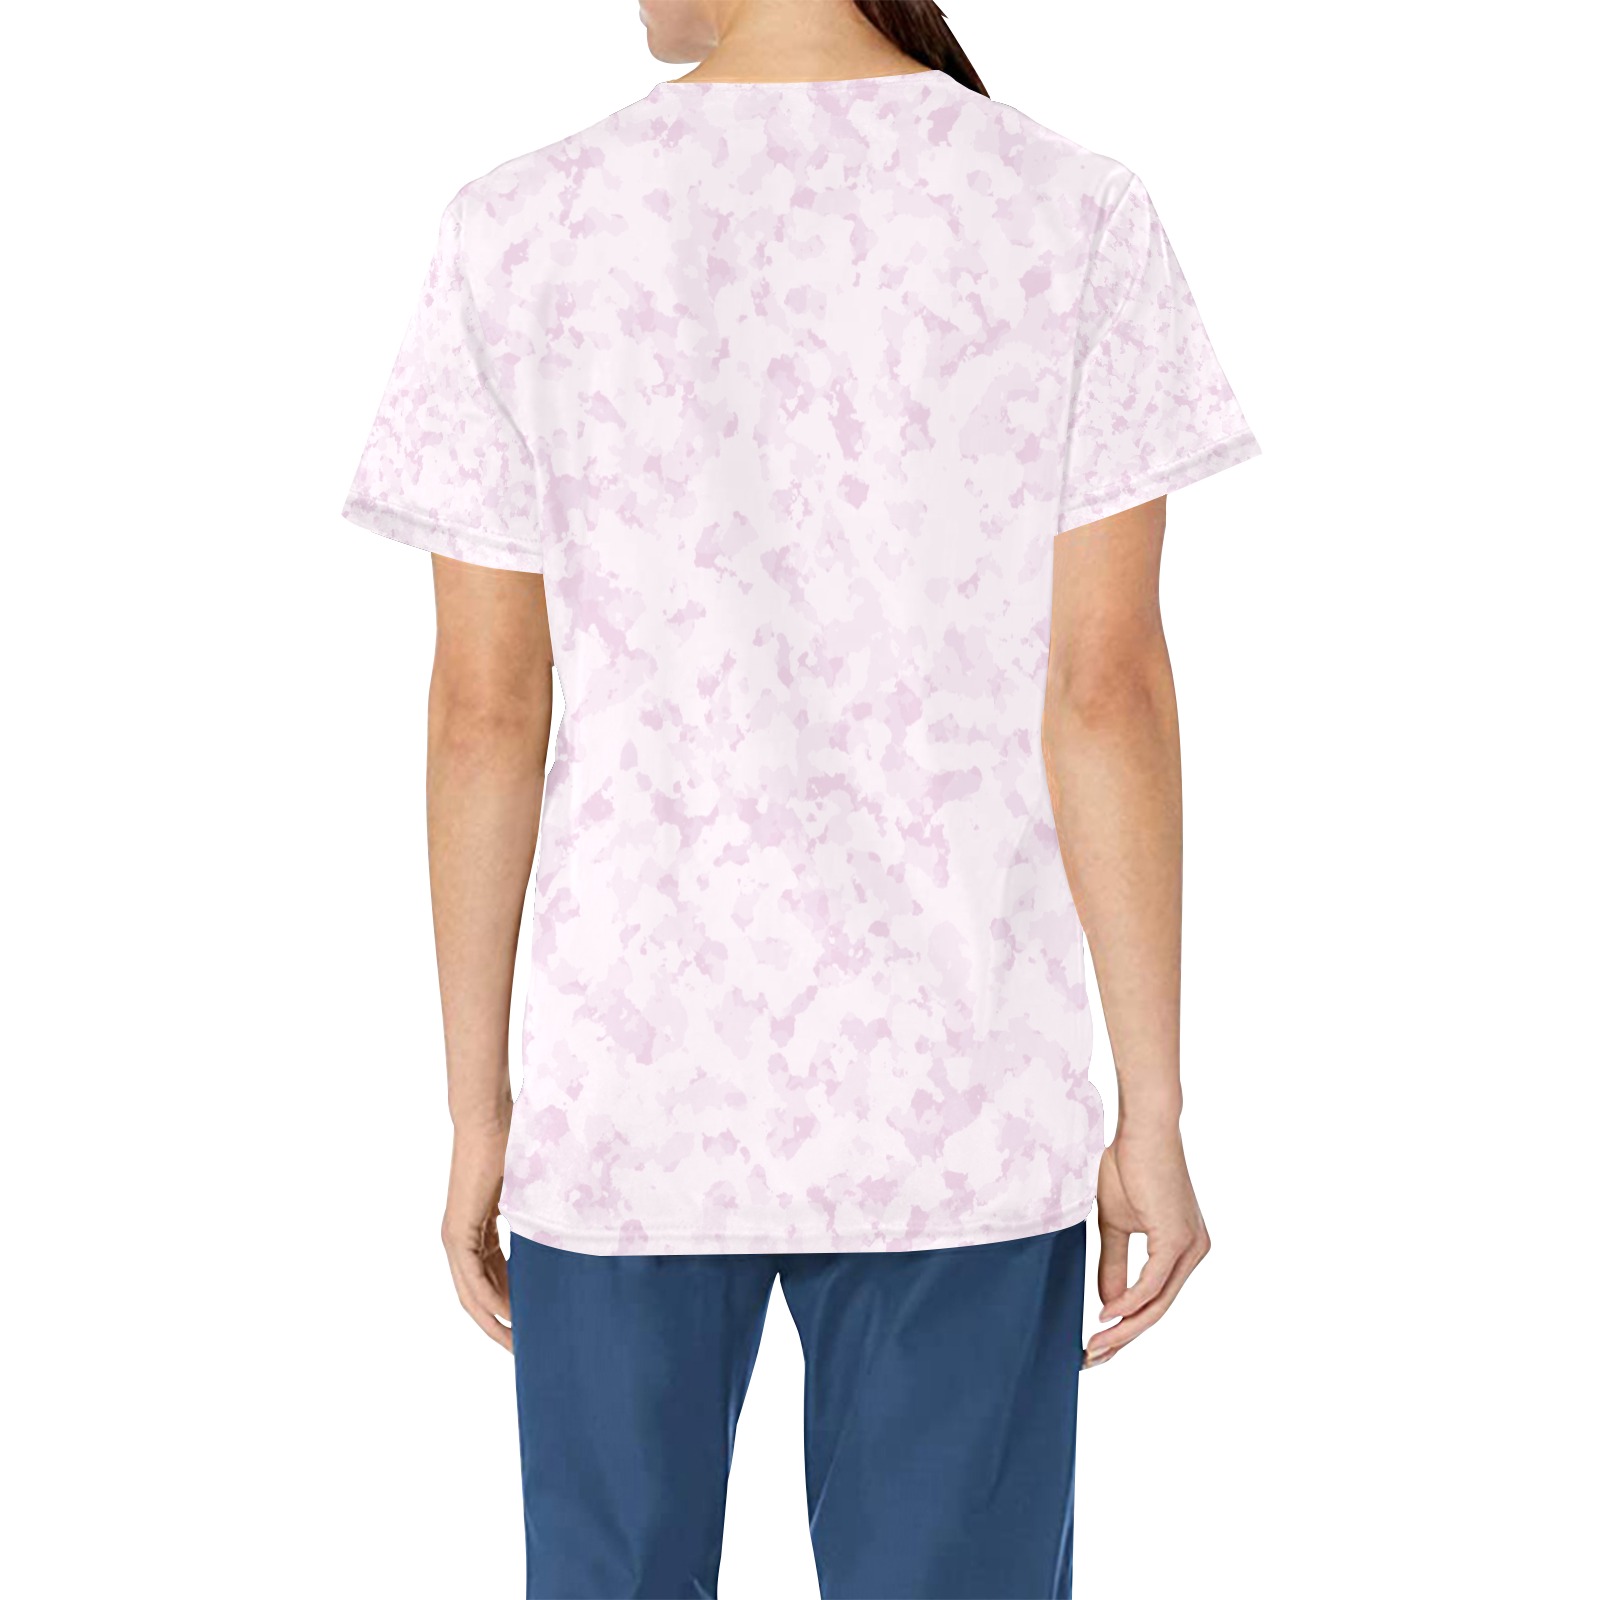 WILD ASTER-2 All Over Print Scrub Top